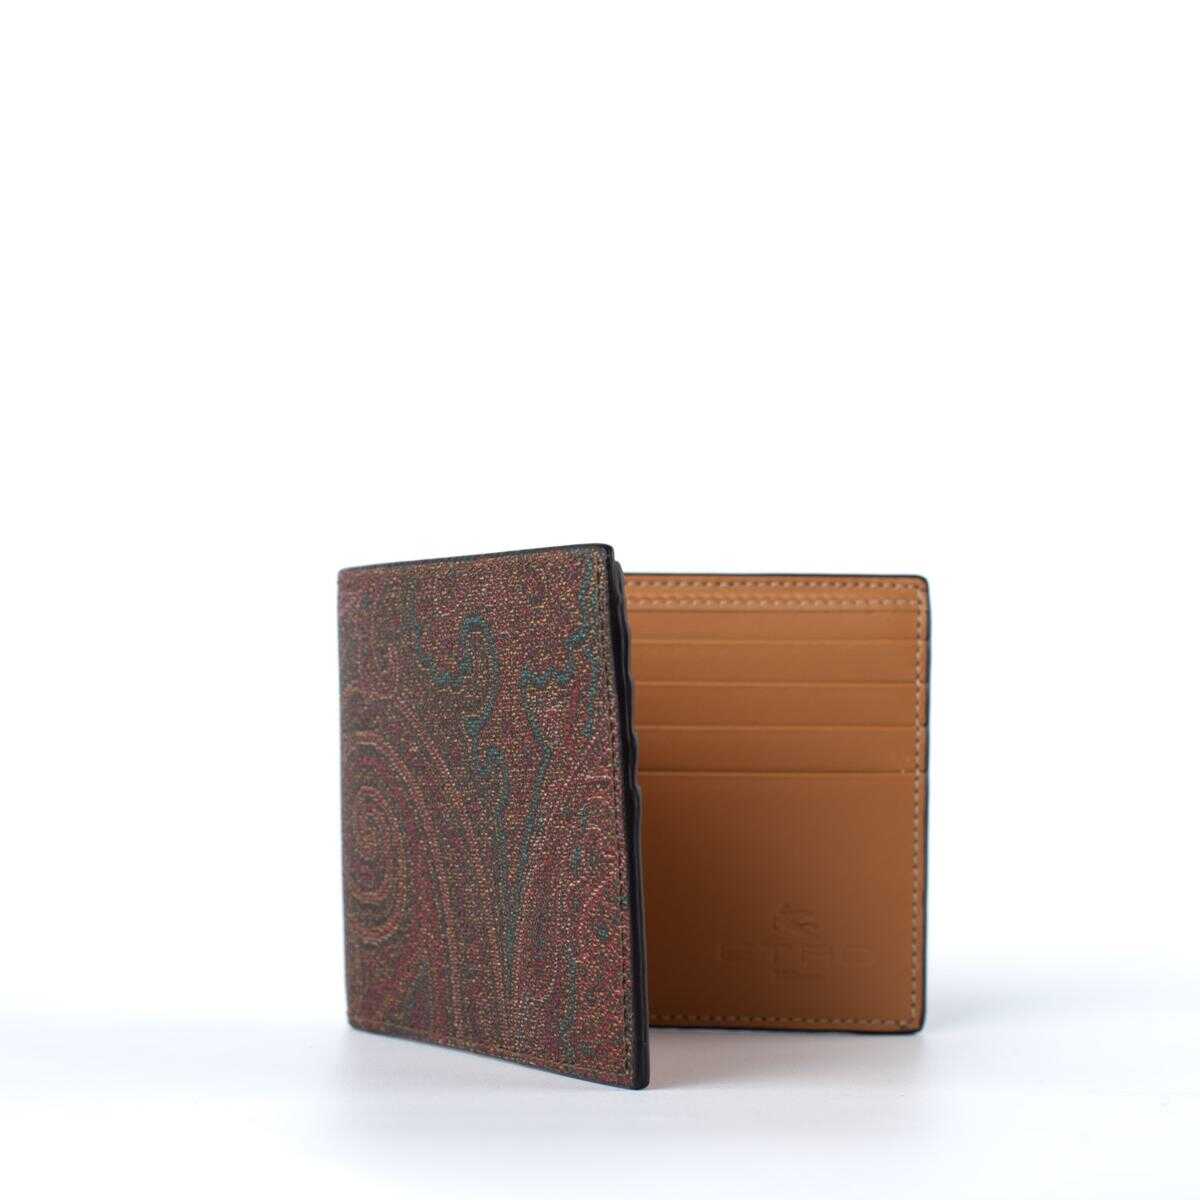 ETRO ETRO Patterned leather wallet BROWN